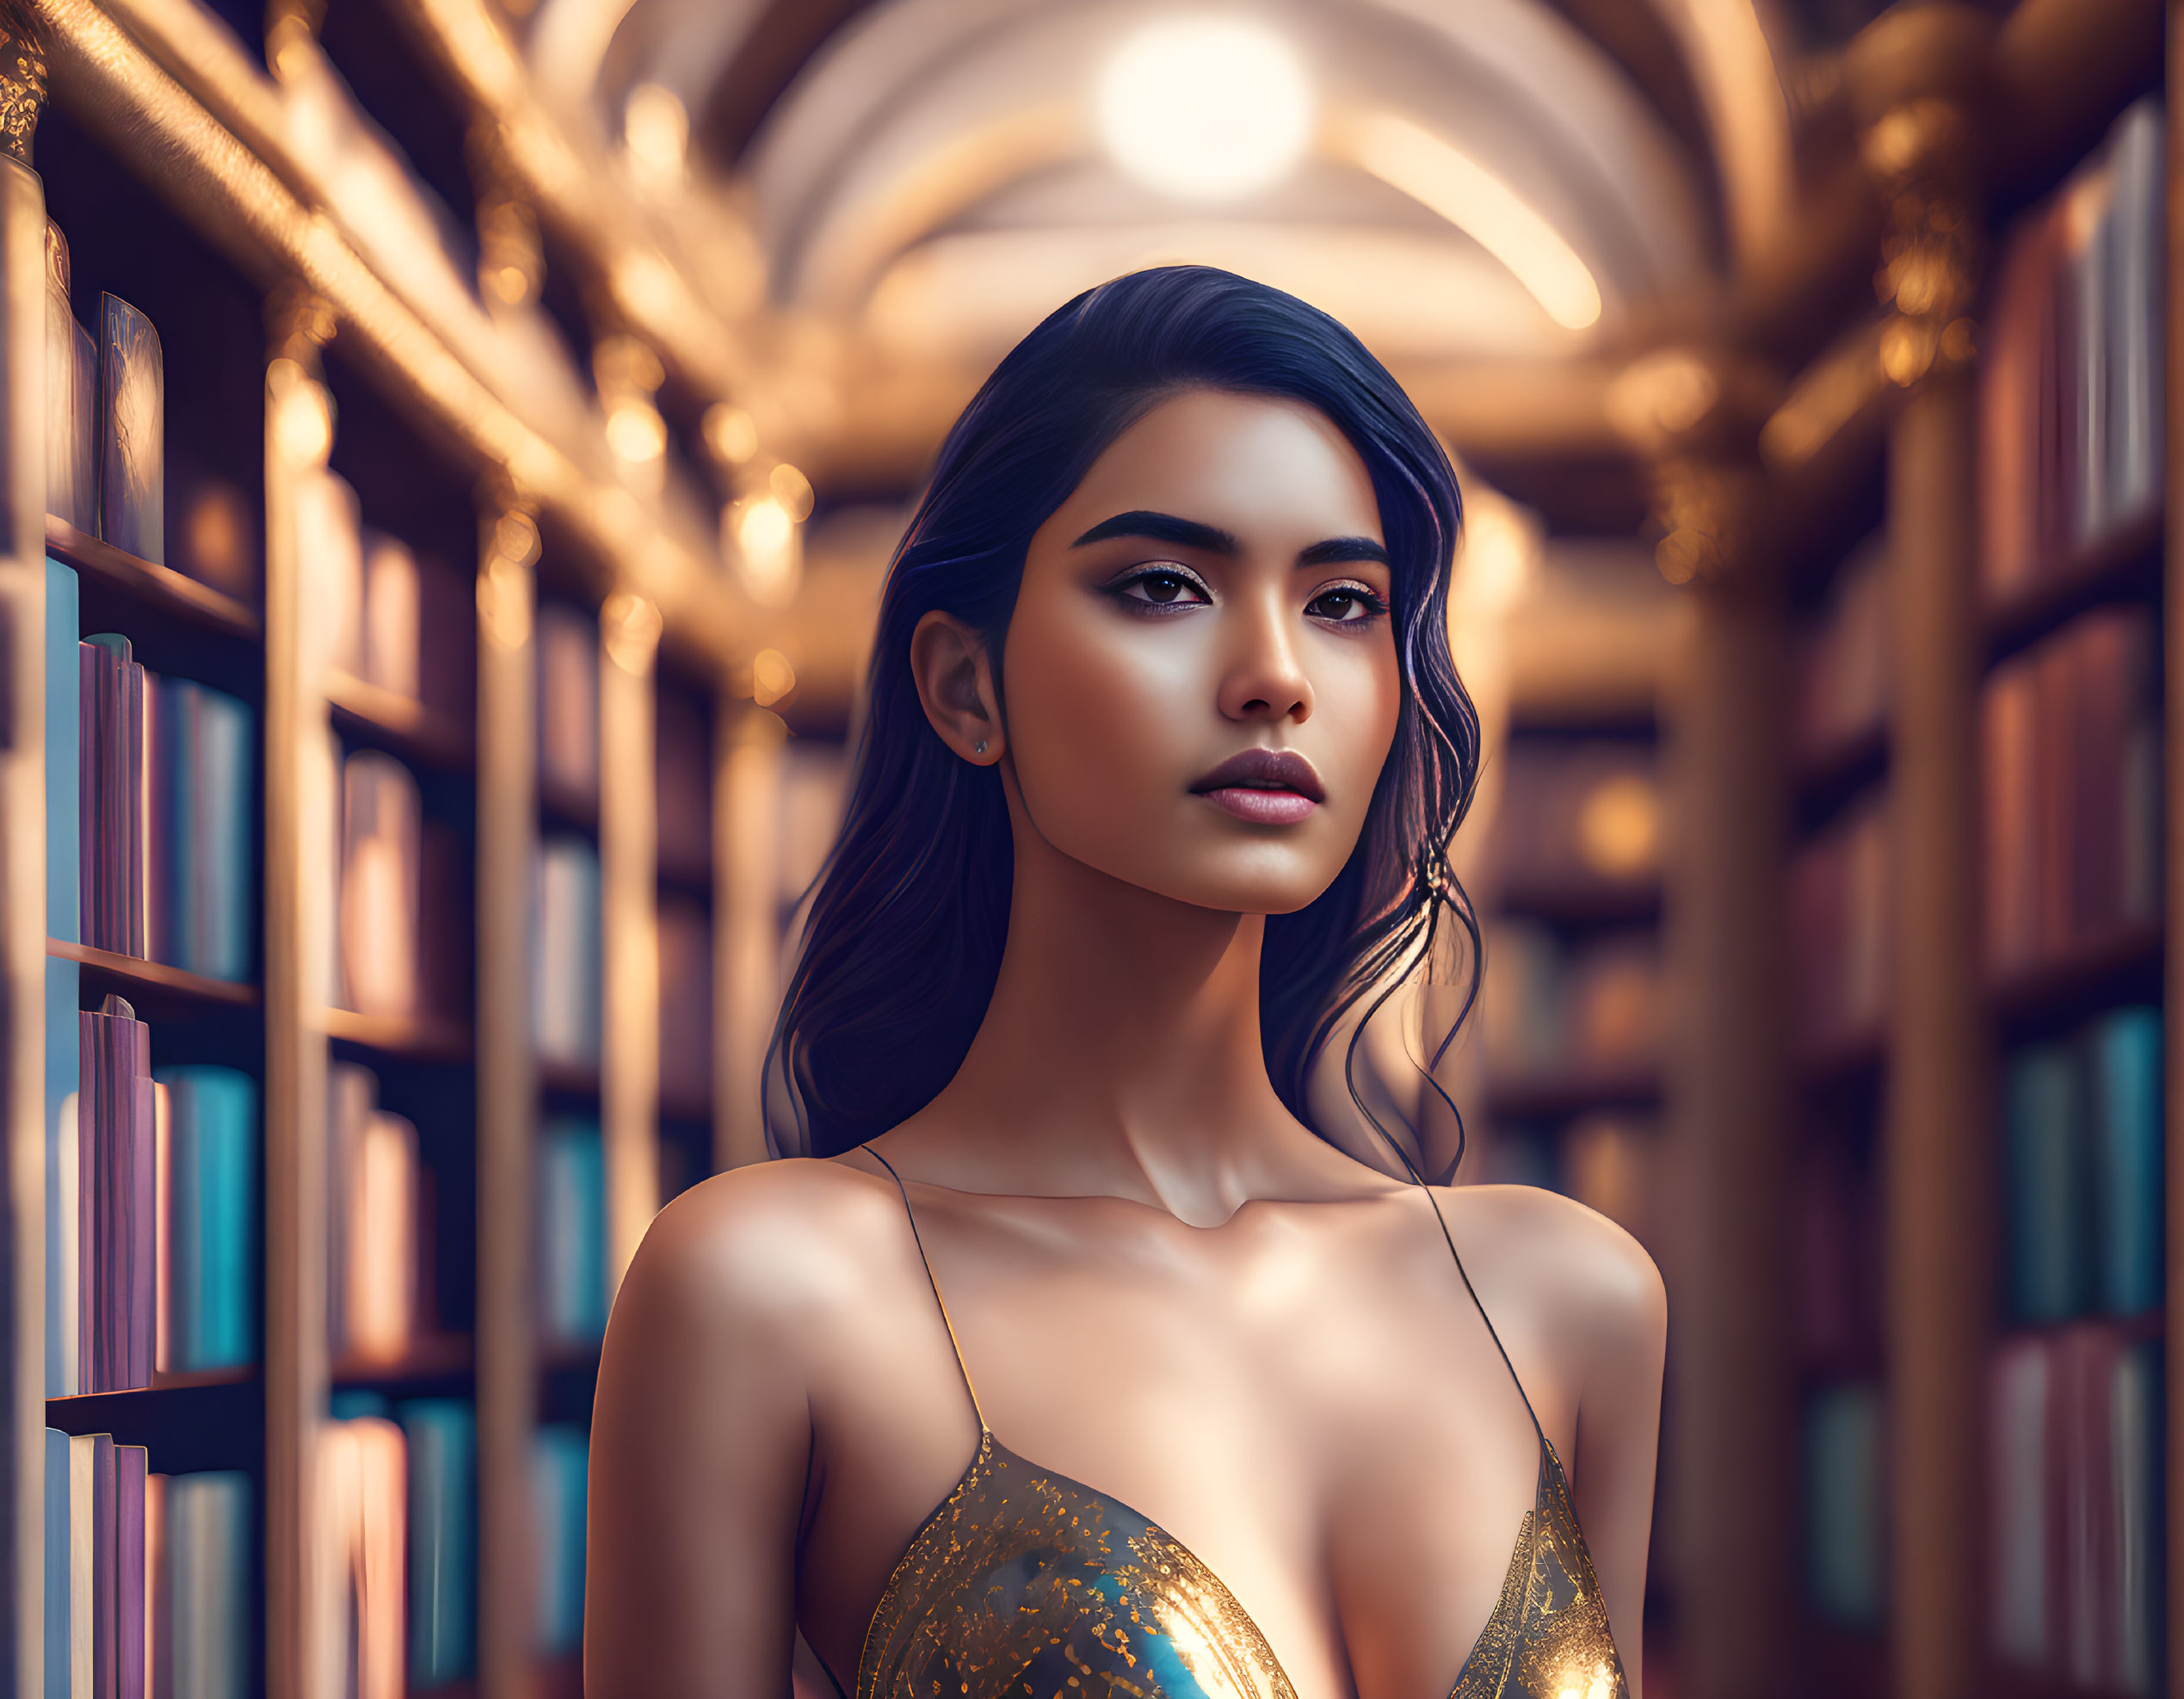 Sexy girl in a library